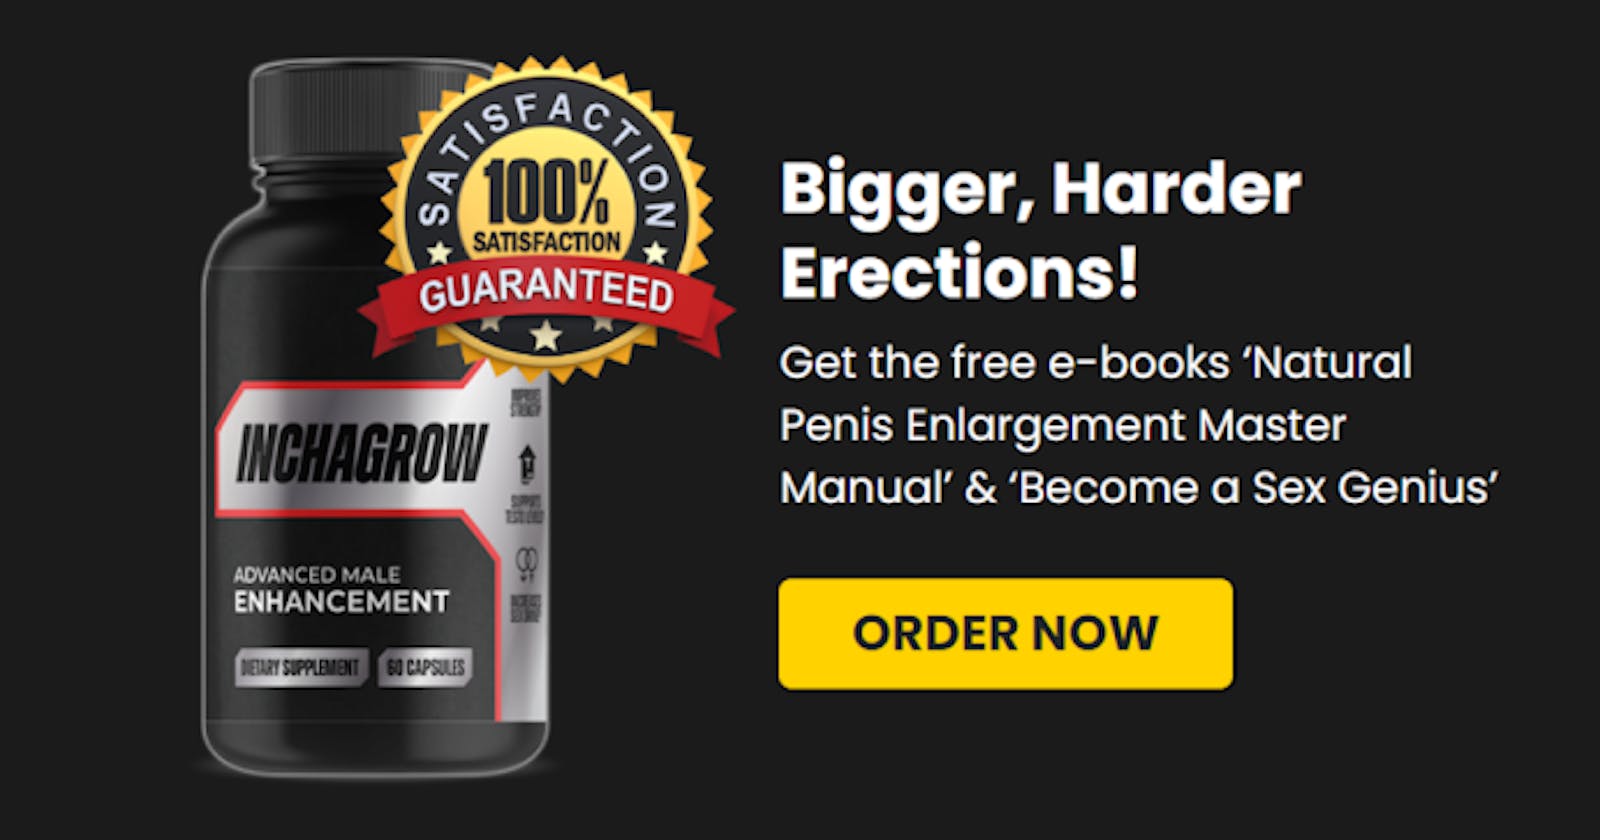 Inchagrow Male Enhancement USA & CA - Real Customer Results or Fake Supplement Scam?